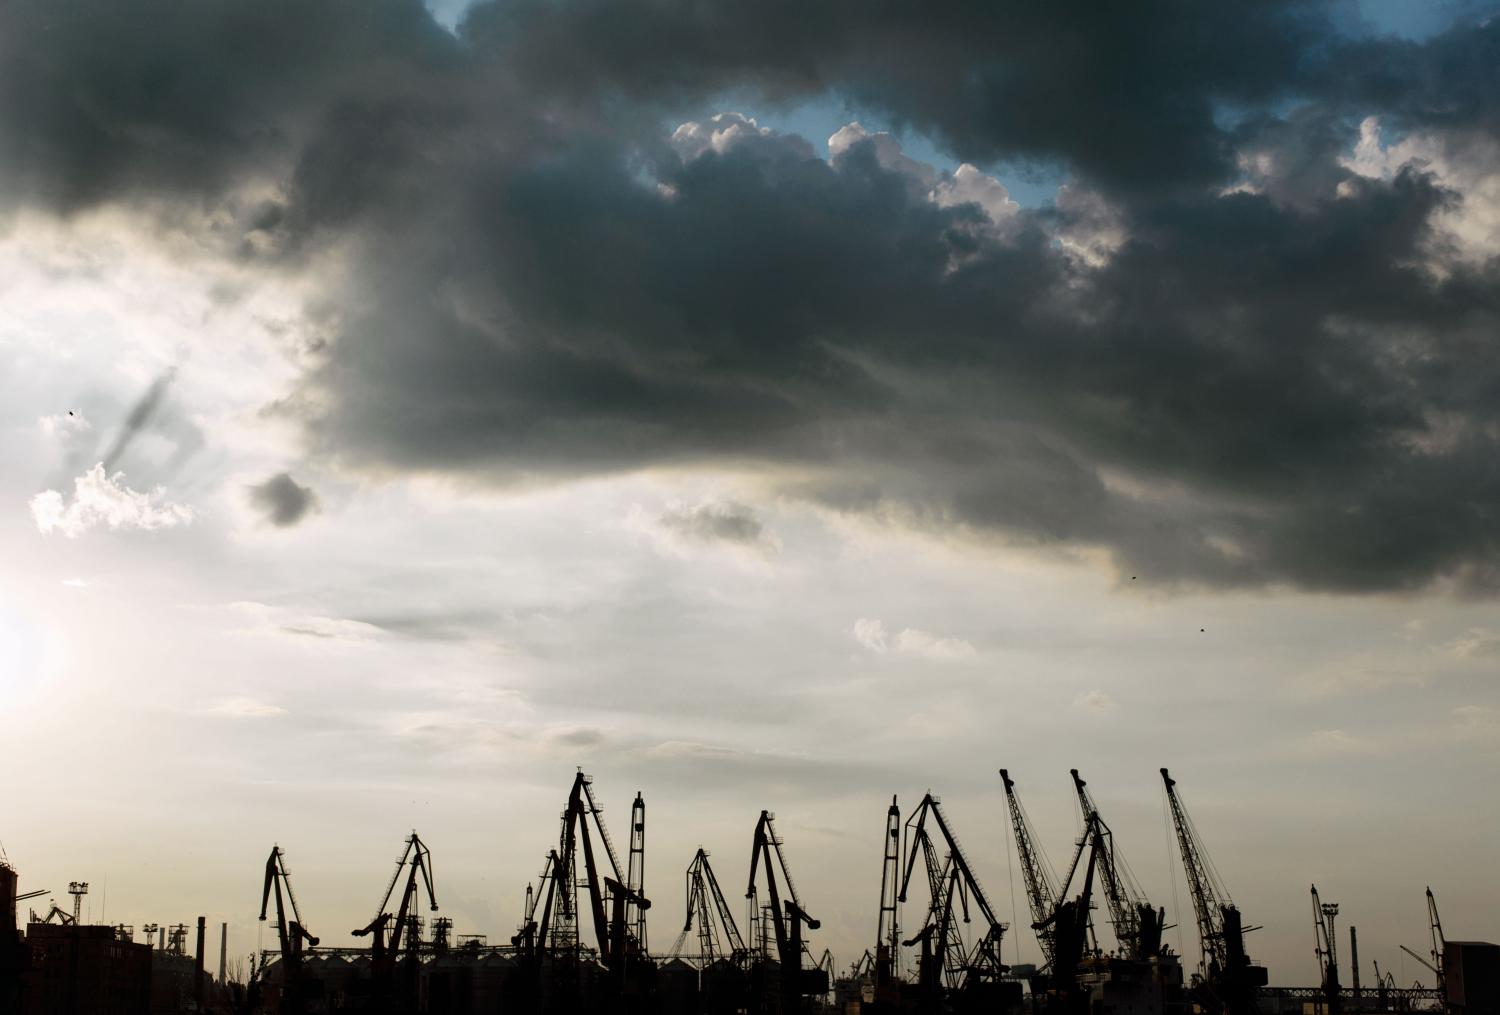 In the evening, the silhouette Industrial port cranes against the backdrop of storm clouds in Odessa, Ukraine